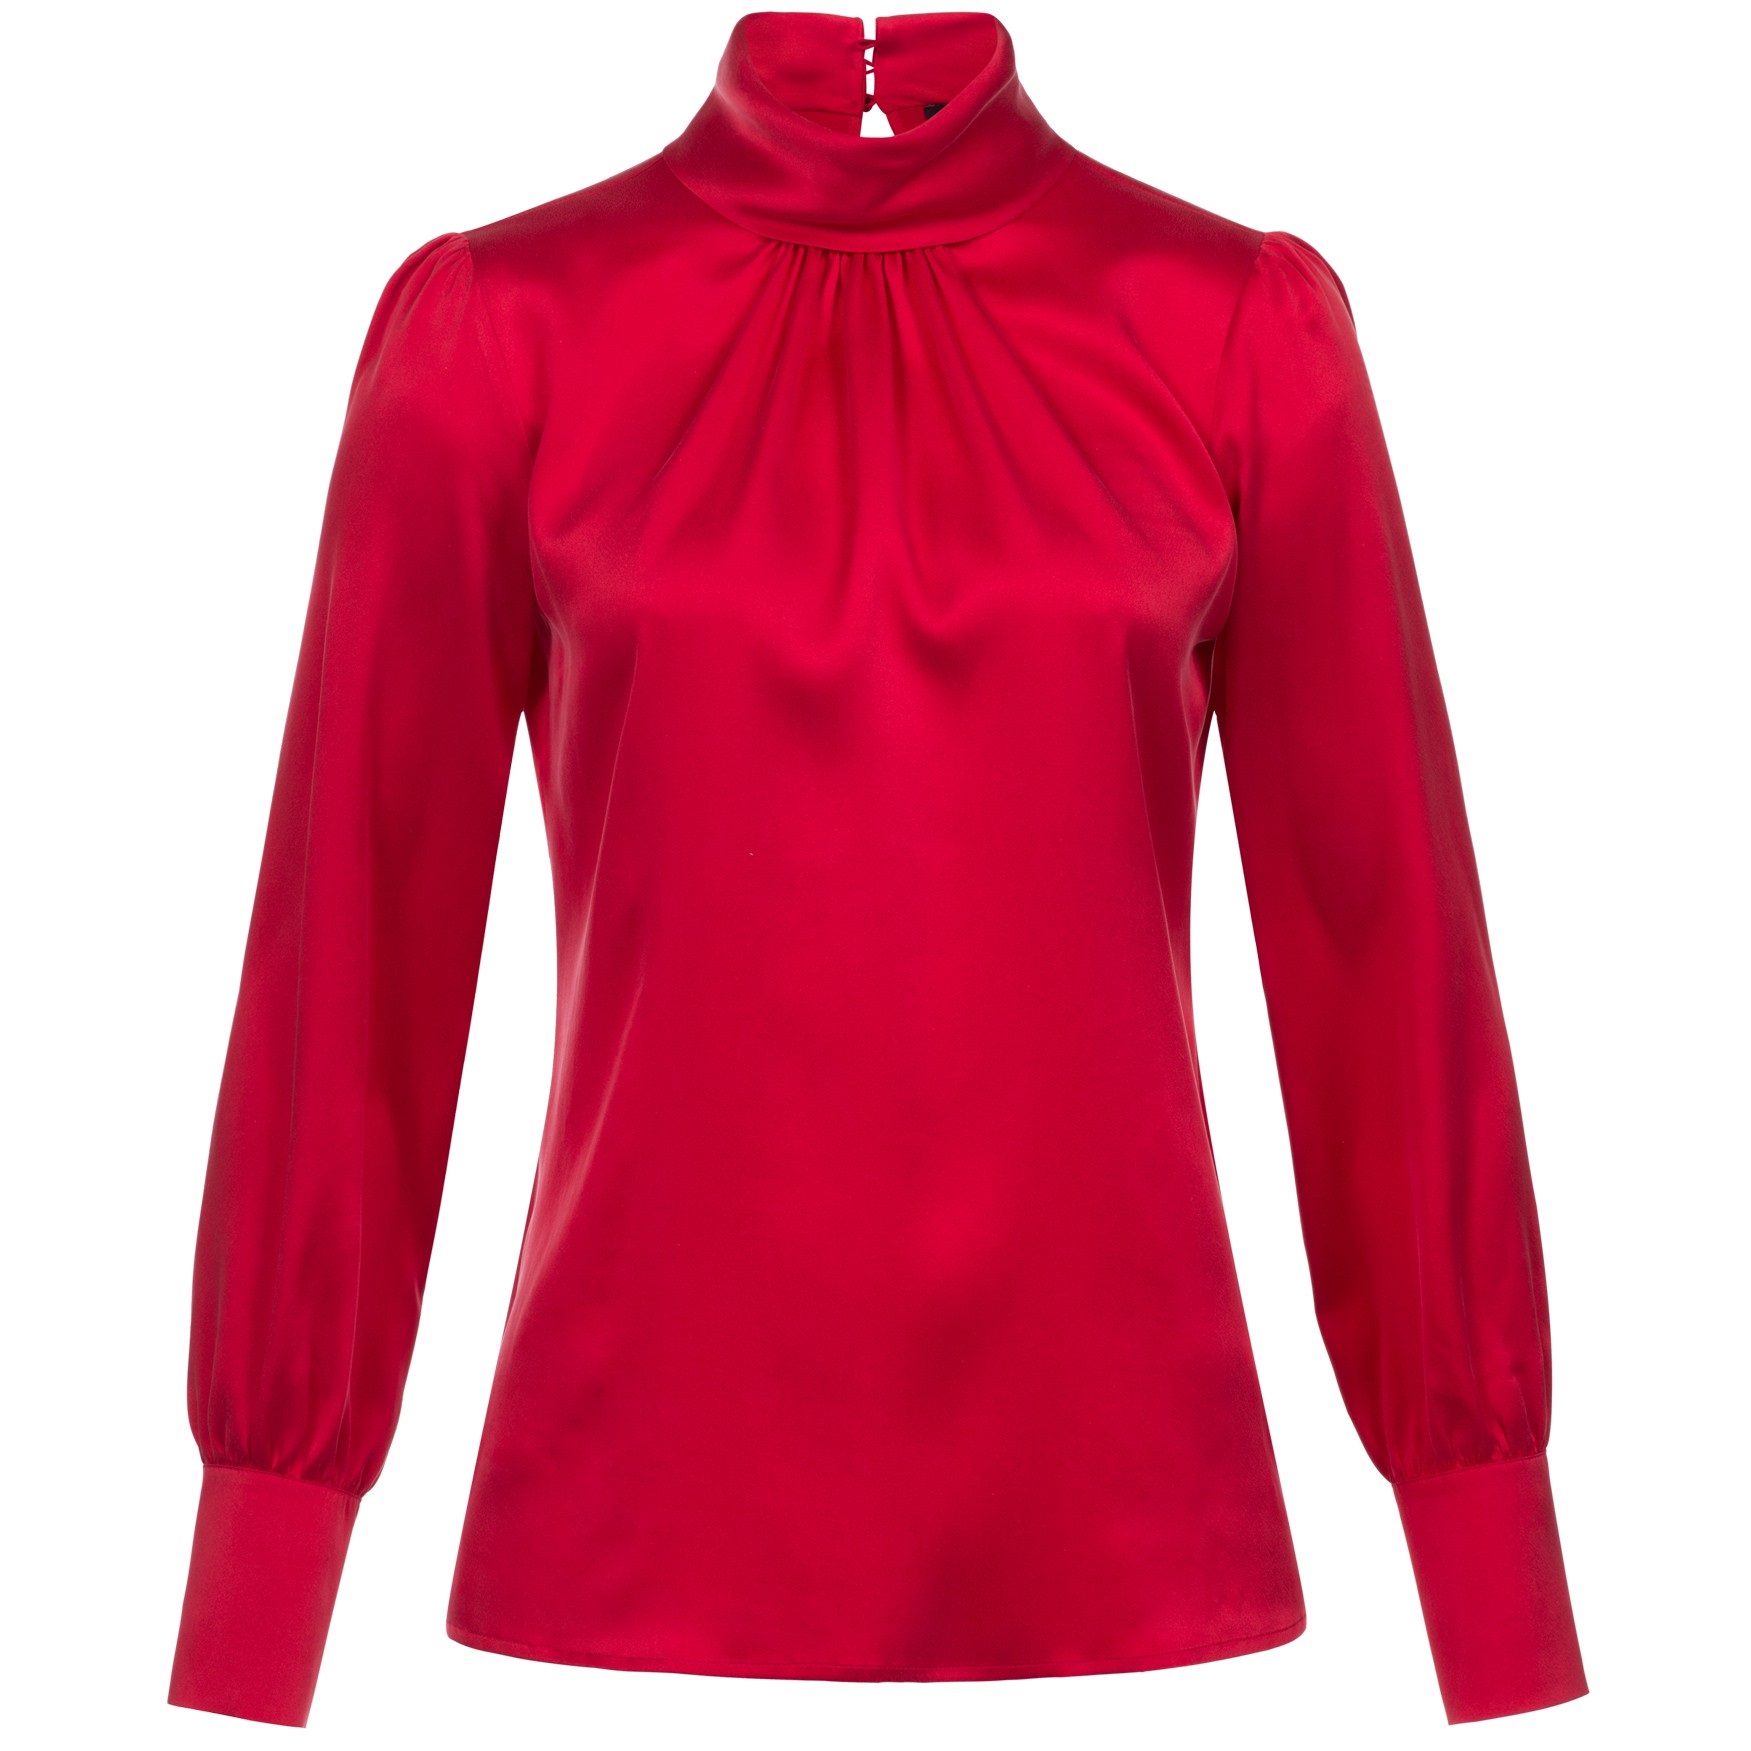 Red Silk Satin Blouse with Long Sleeve for Fashion Ladies